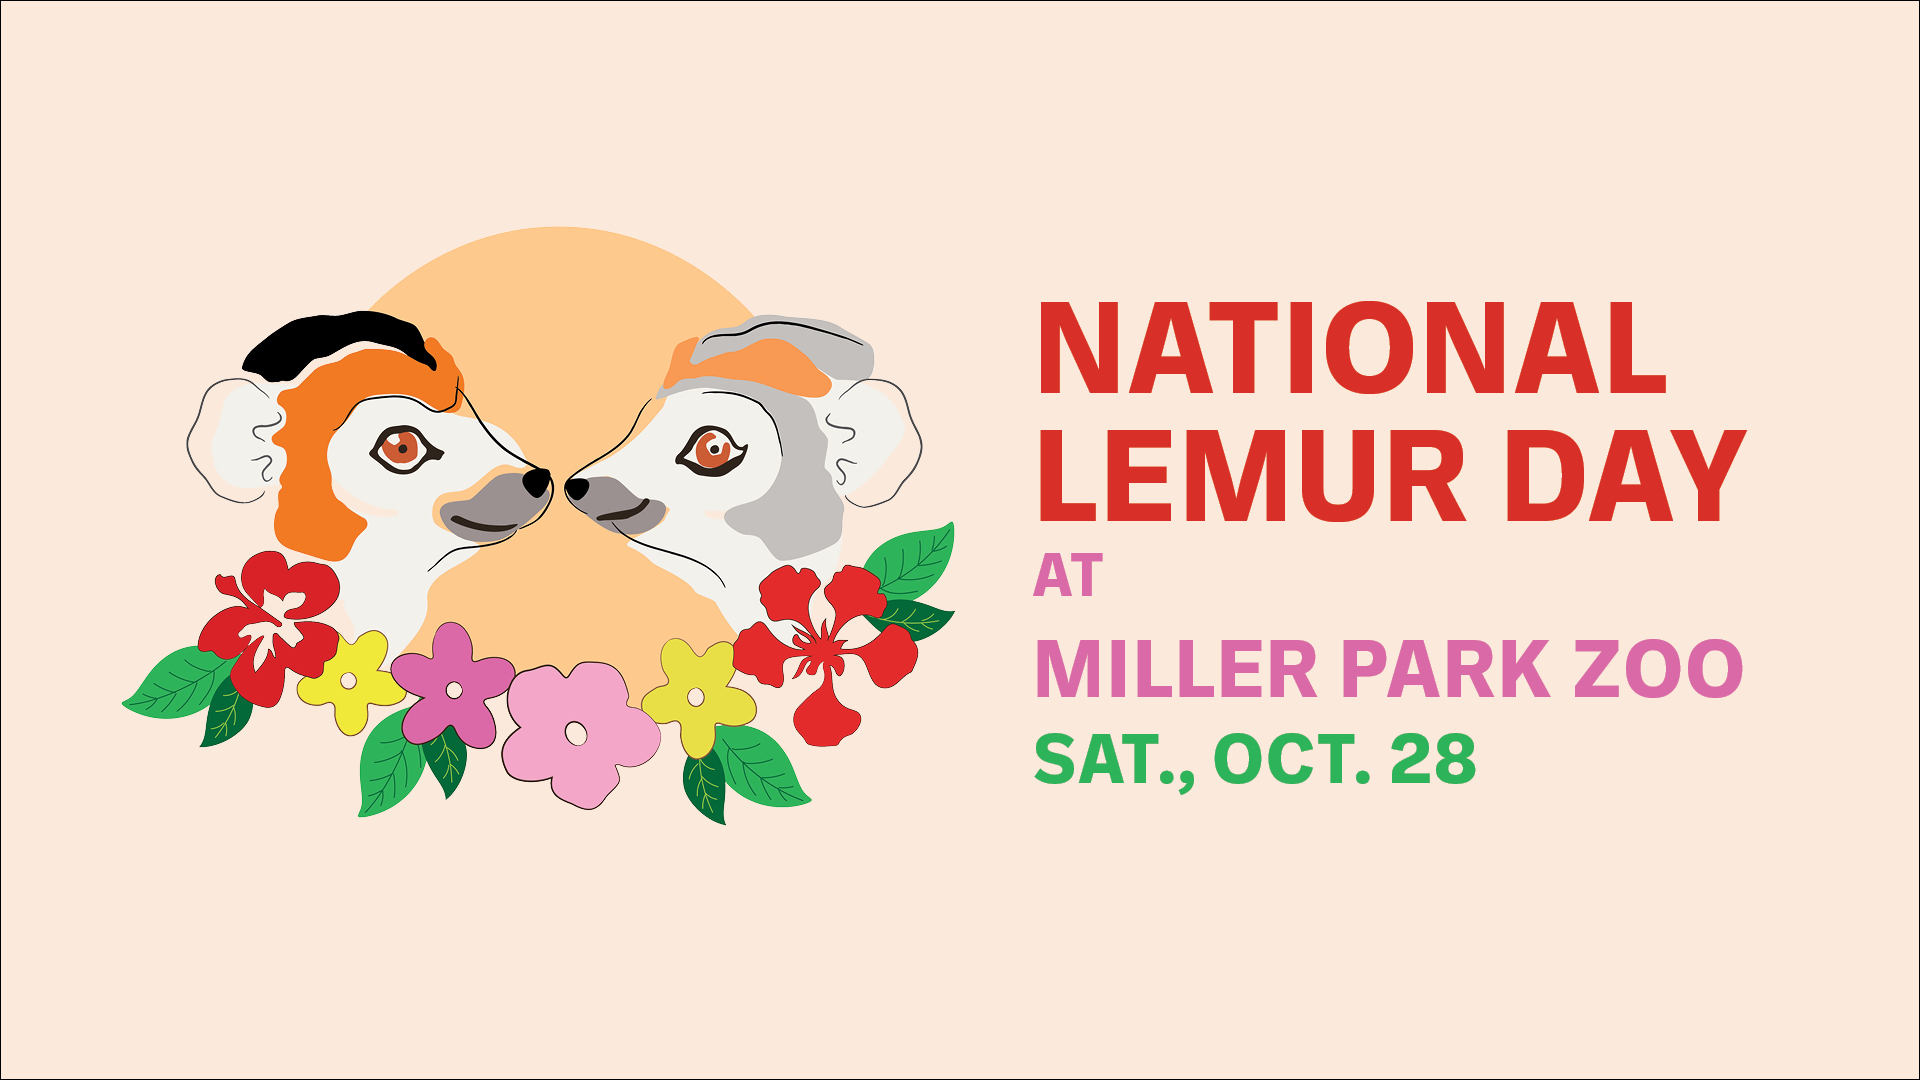 NATIONAL LEMUR DAY AT THE MILLER PARK ZOO